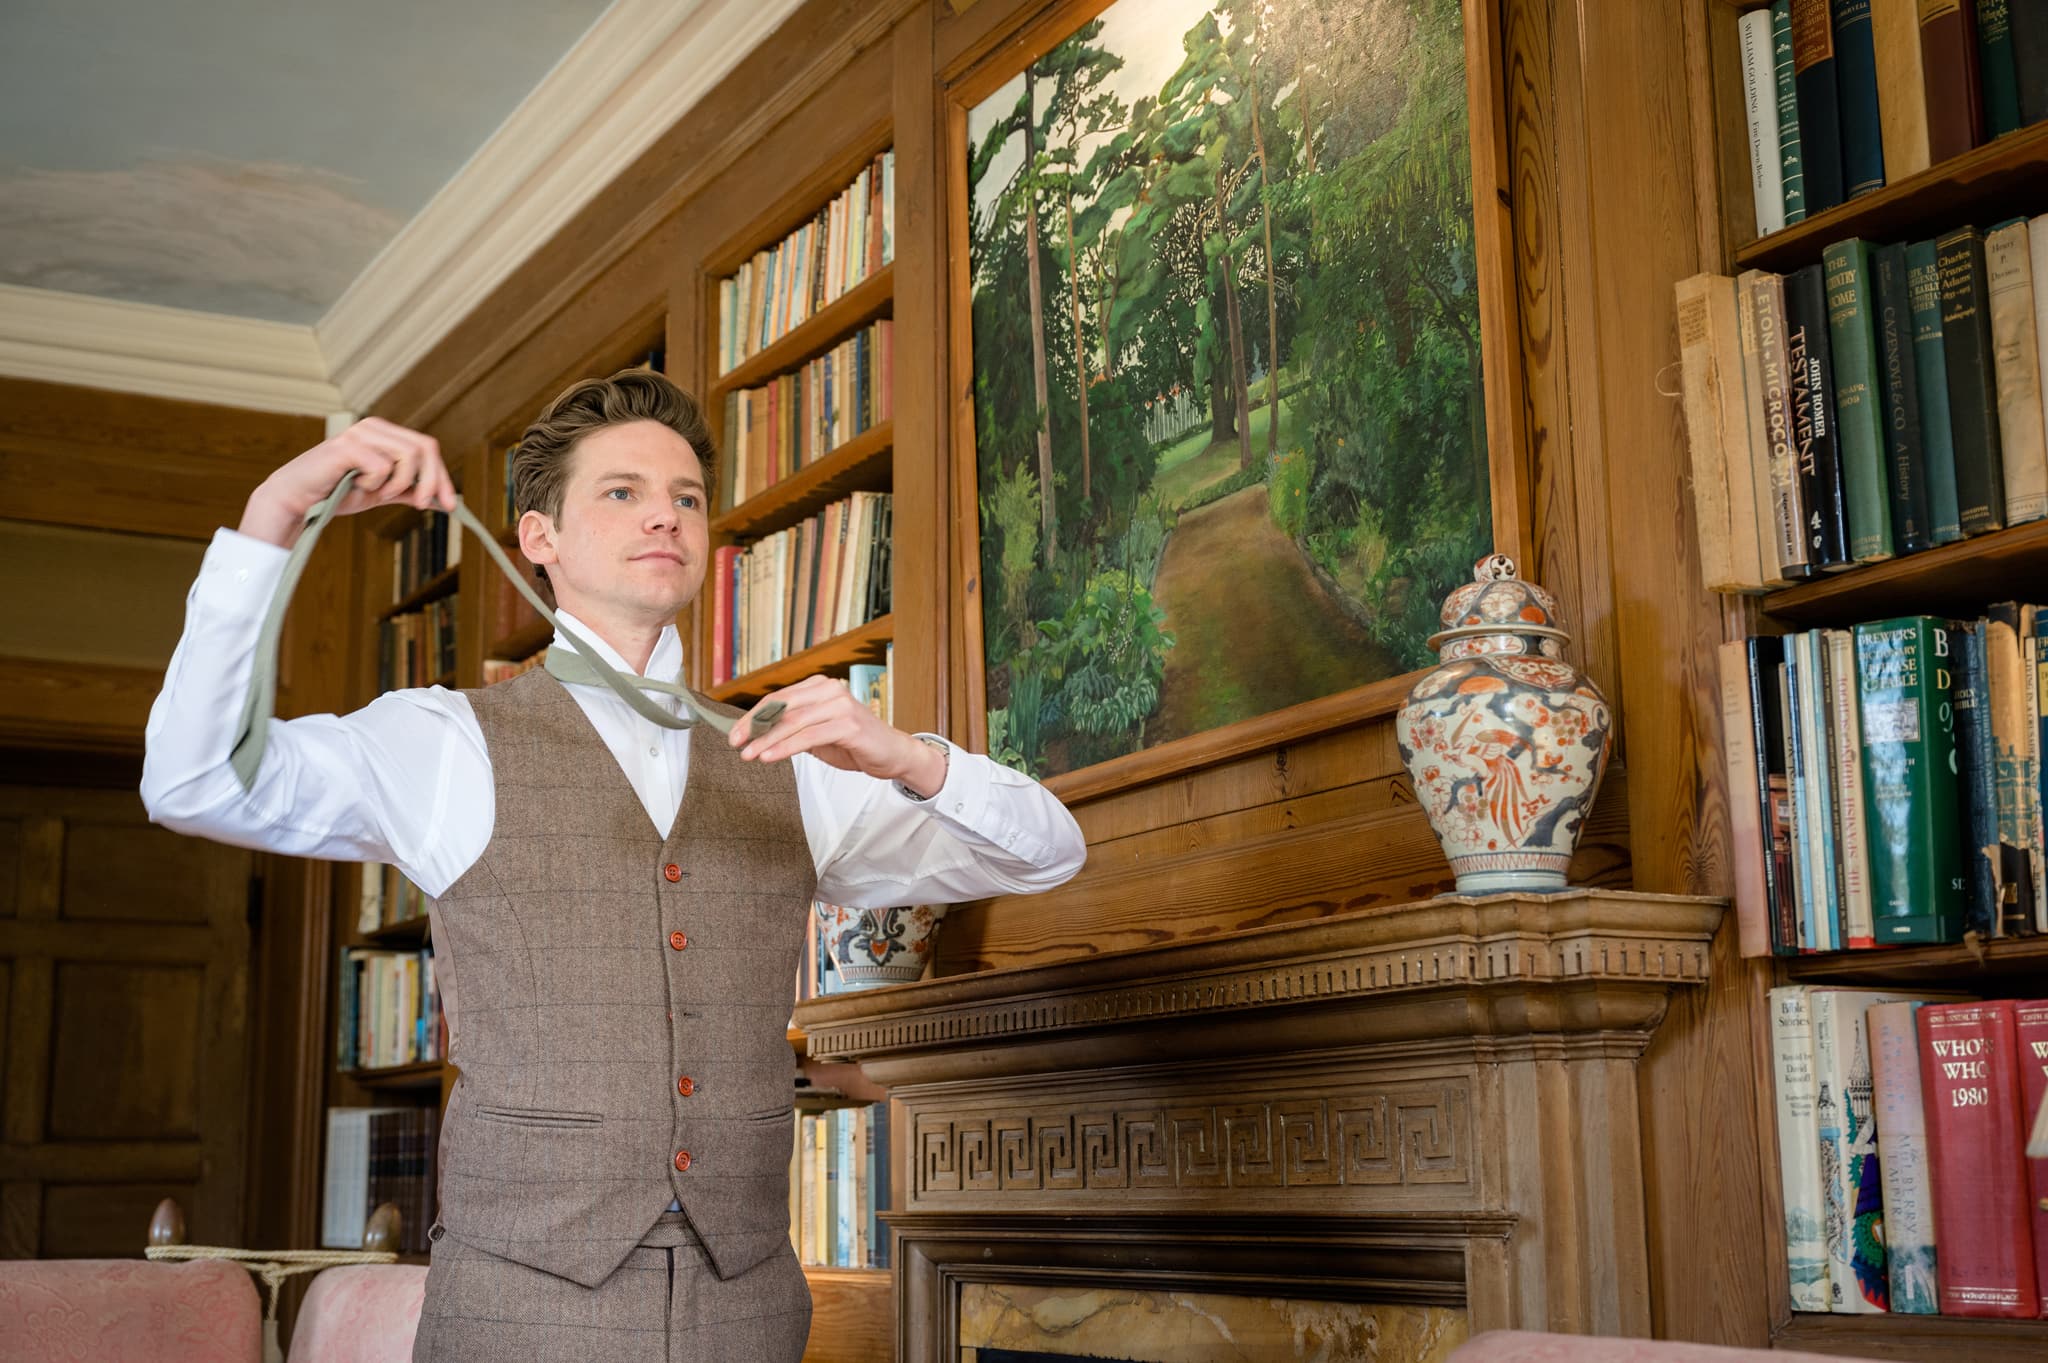 Groom putting on his tie in front of the fireplace in the library at Sutton Bonington Hall